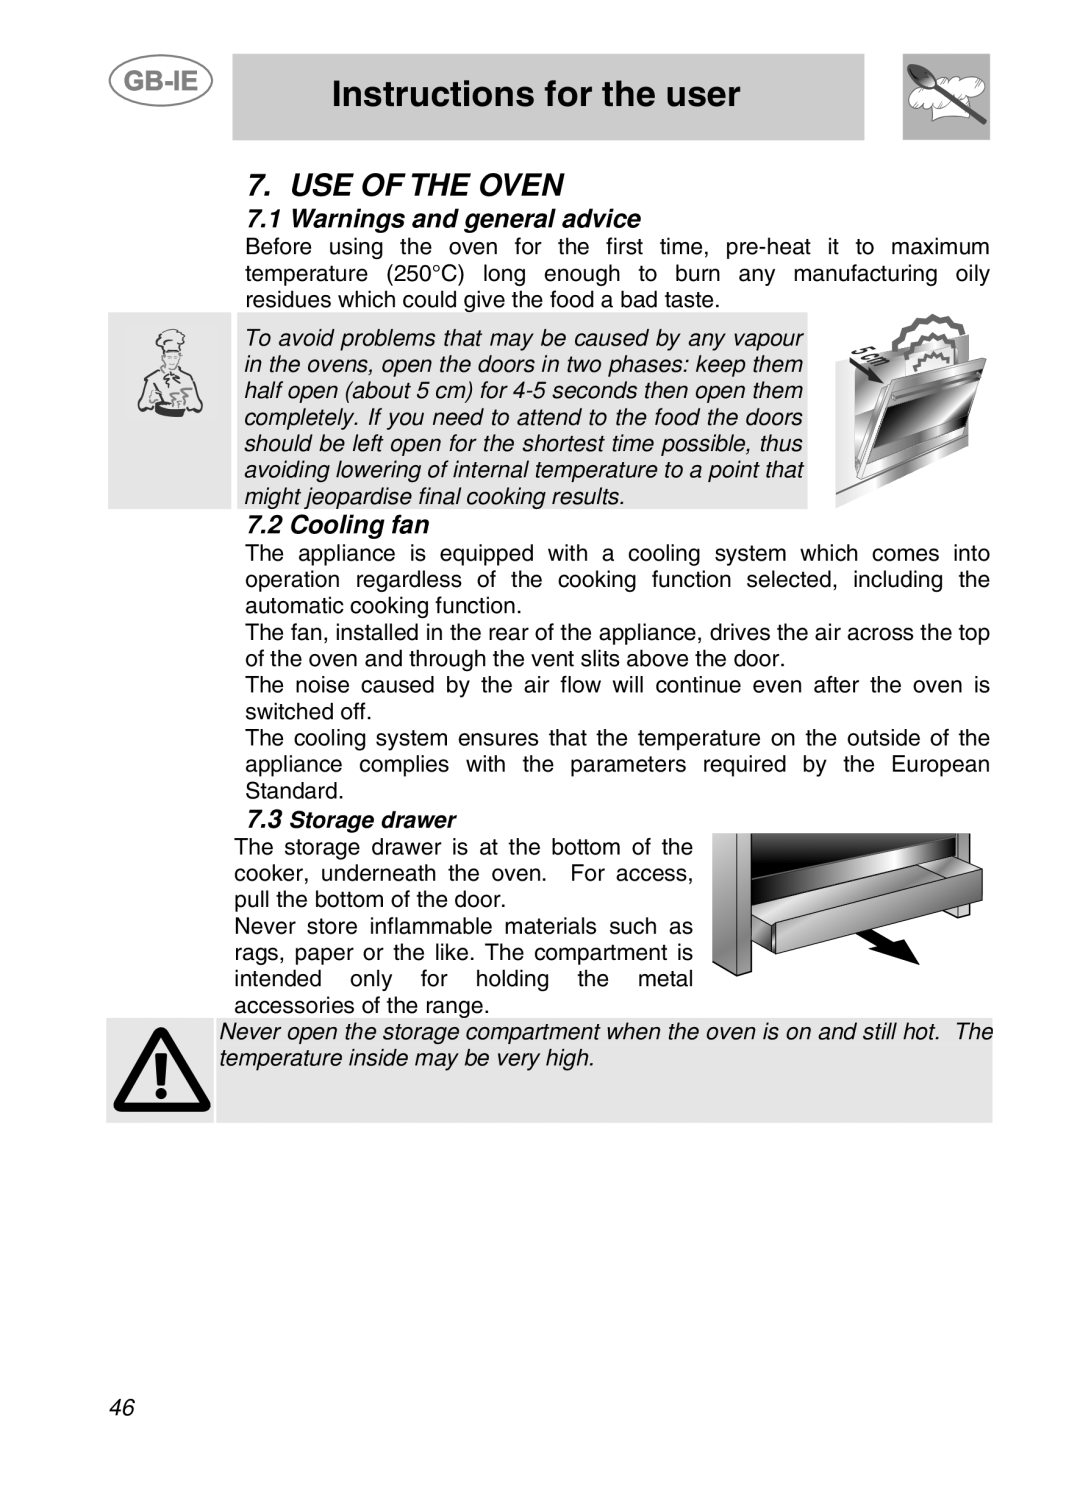 Smeg CS71-5 manual Use Of The Oven, Warnings and general advice, Cooling fan, 7.3Storage drawer, Instructions for the user 